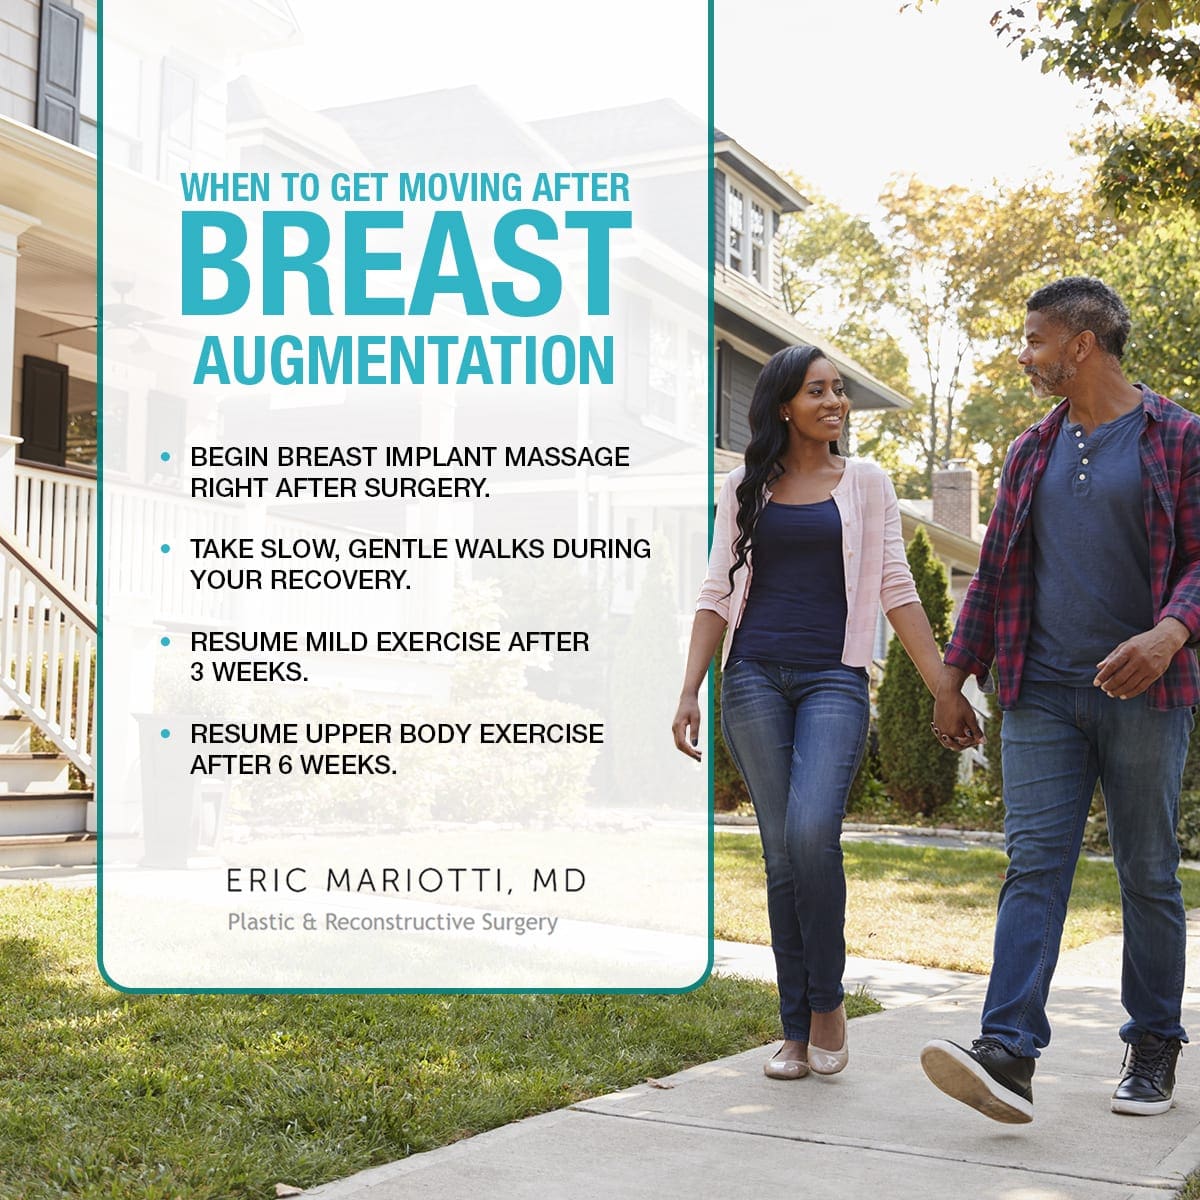 When to Get Moving After Breast Augmentation